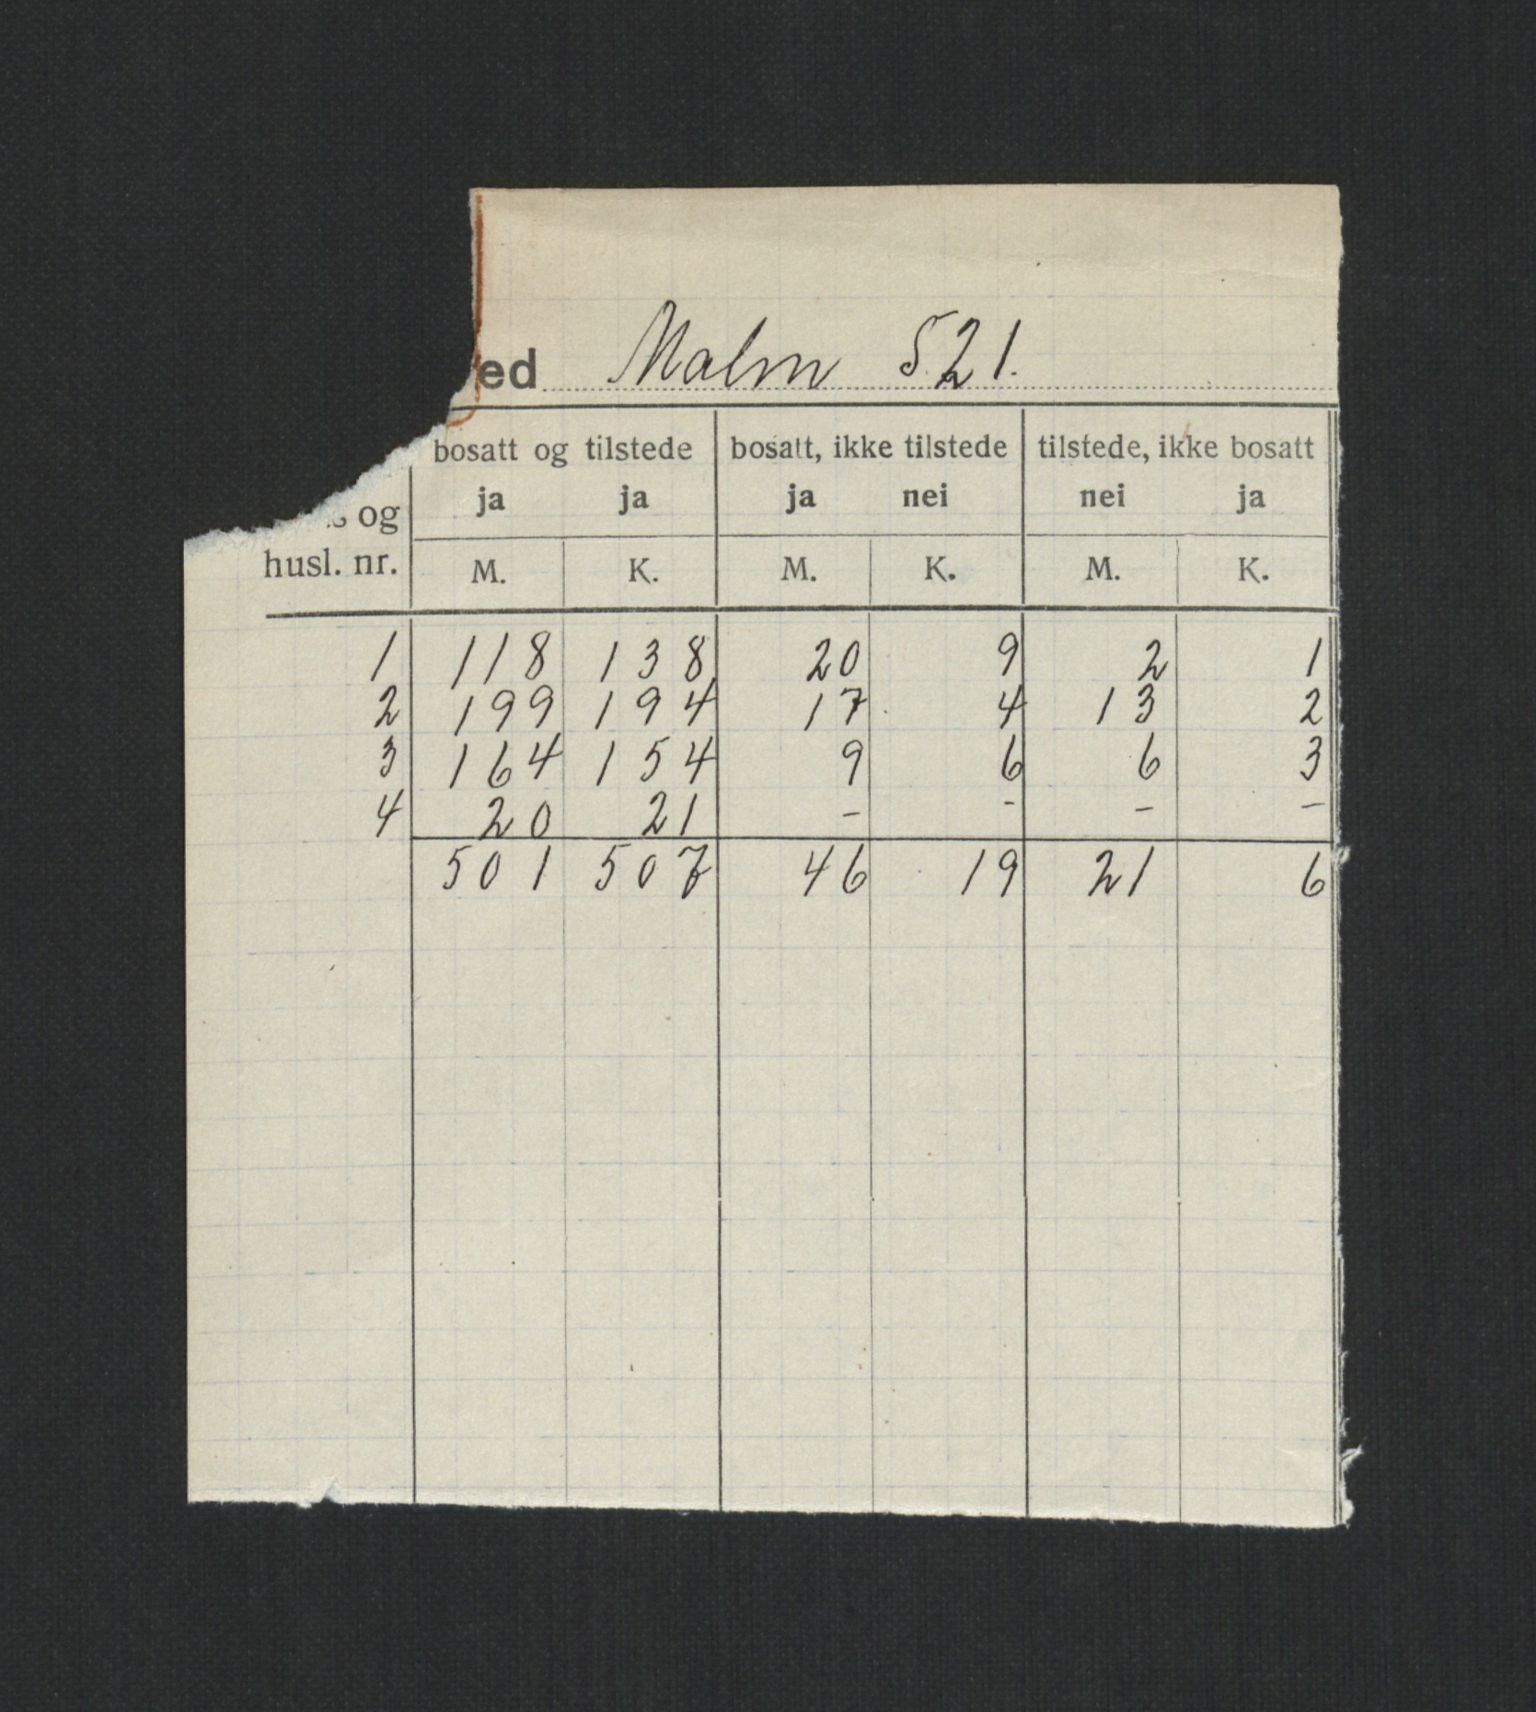 SAT, 1920 census for Malm, 1920, p. 2